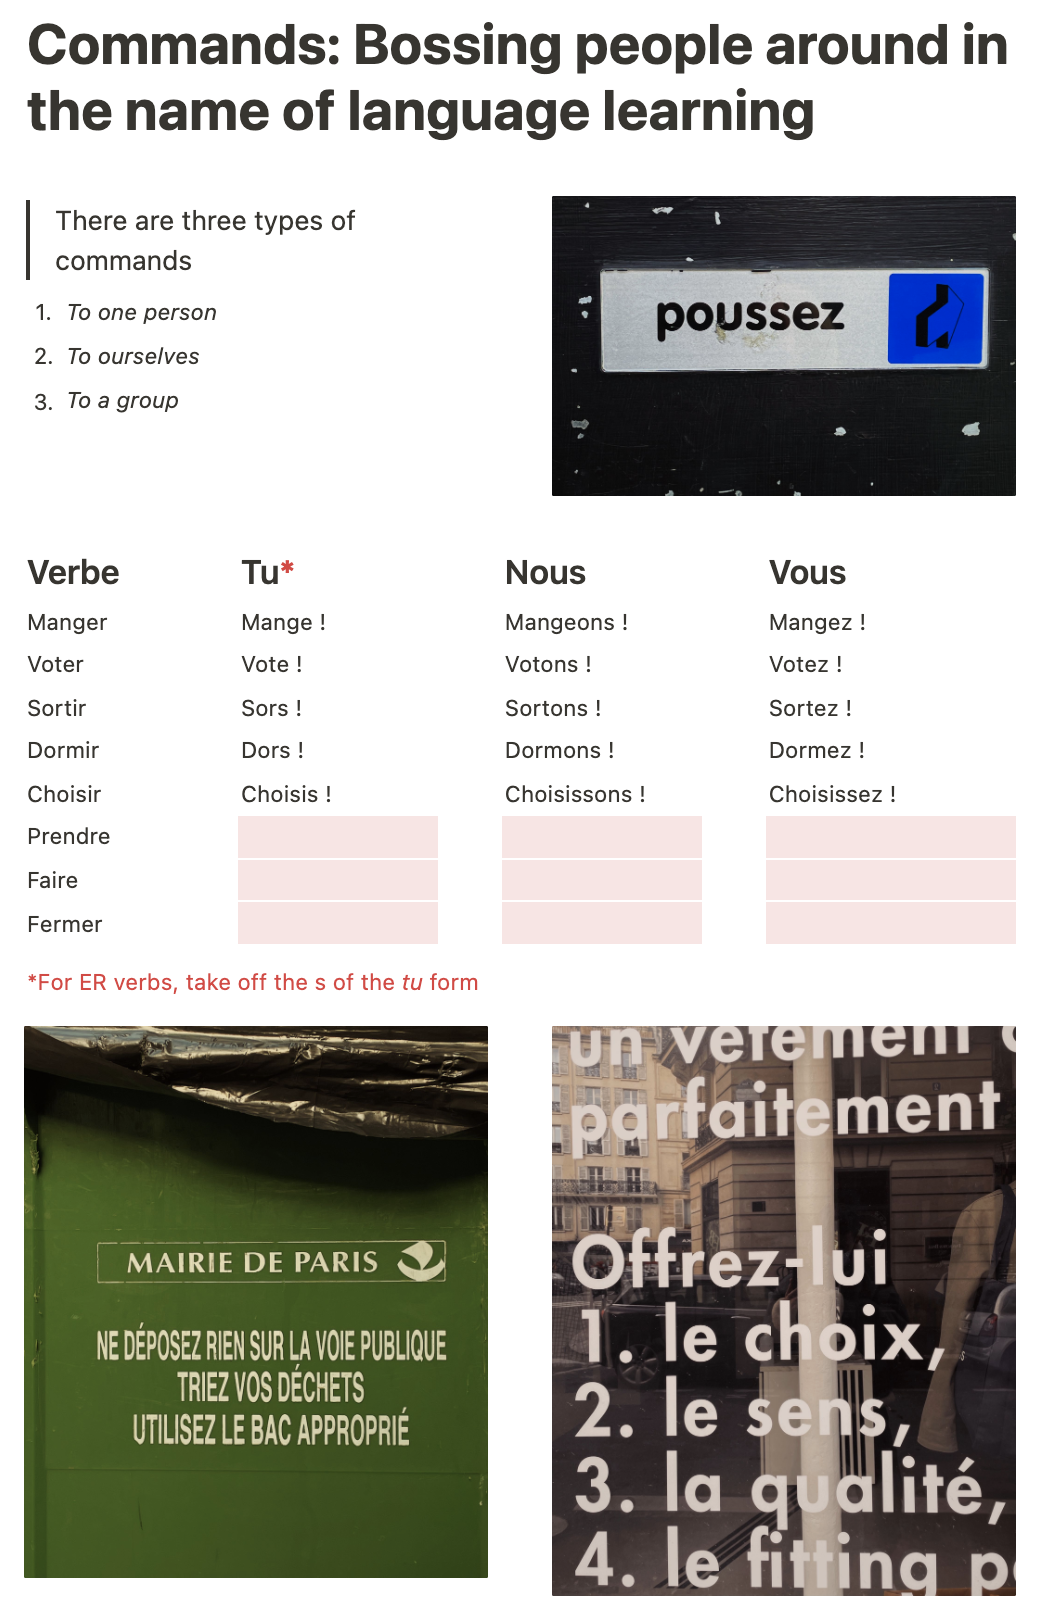 Commands in French